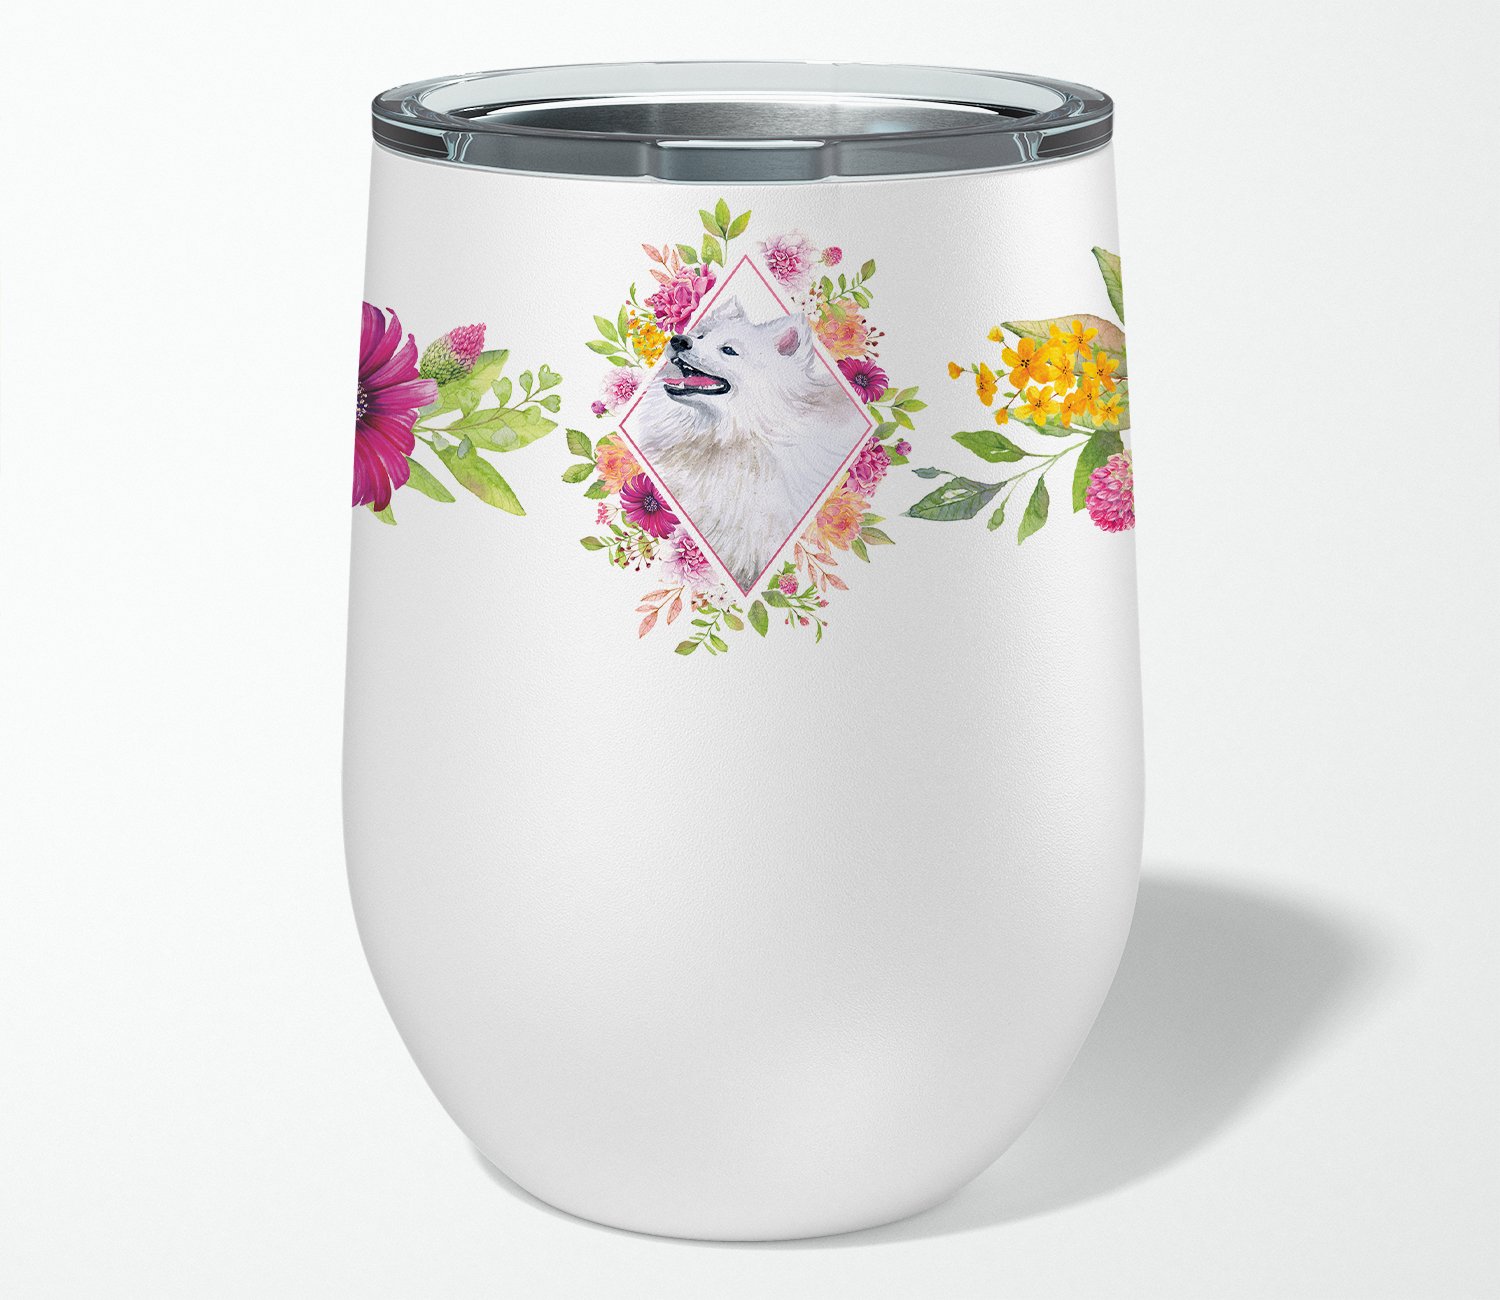 Samoyed Pink Flowers Stainless Steel 12 oz Stemless Wine Glass CK4177TBL12 by Caroline's Treasures